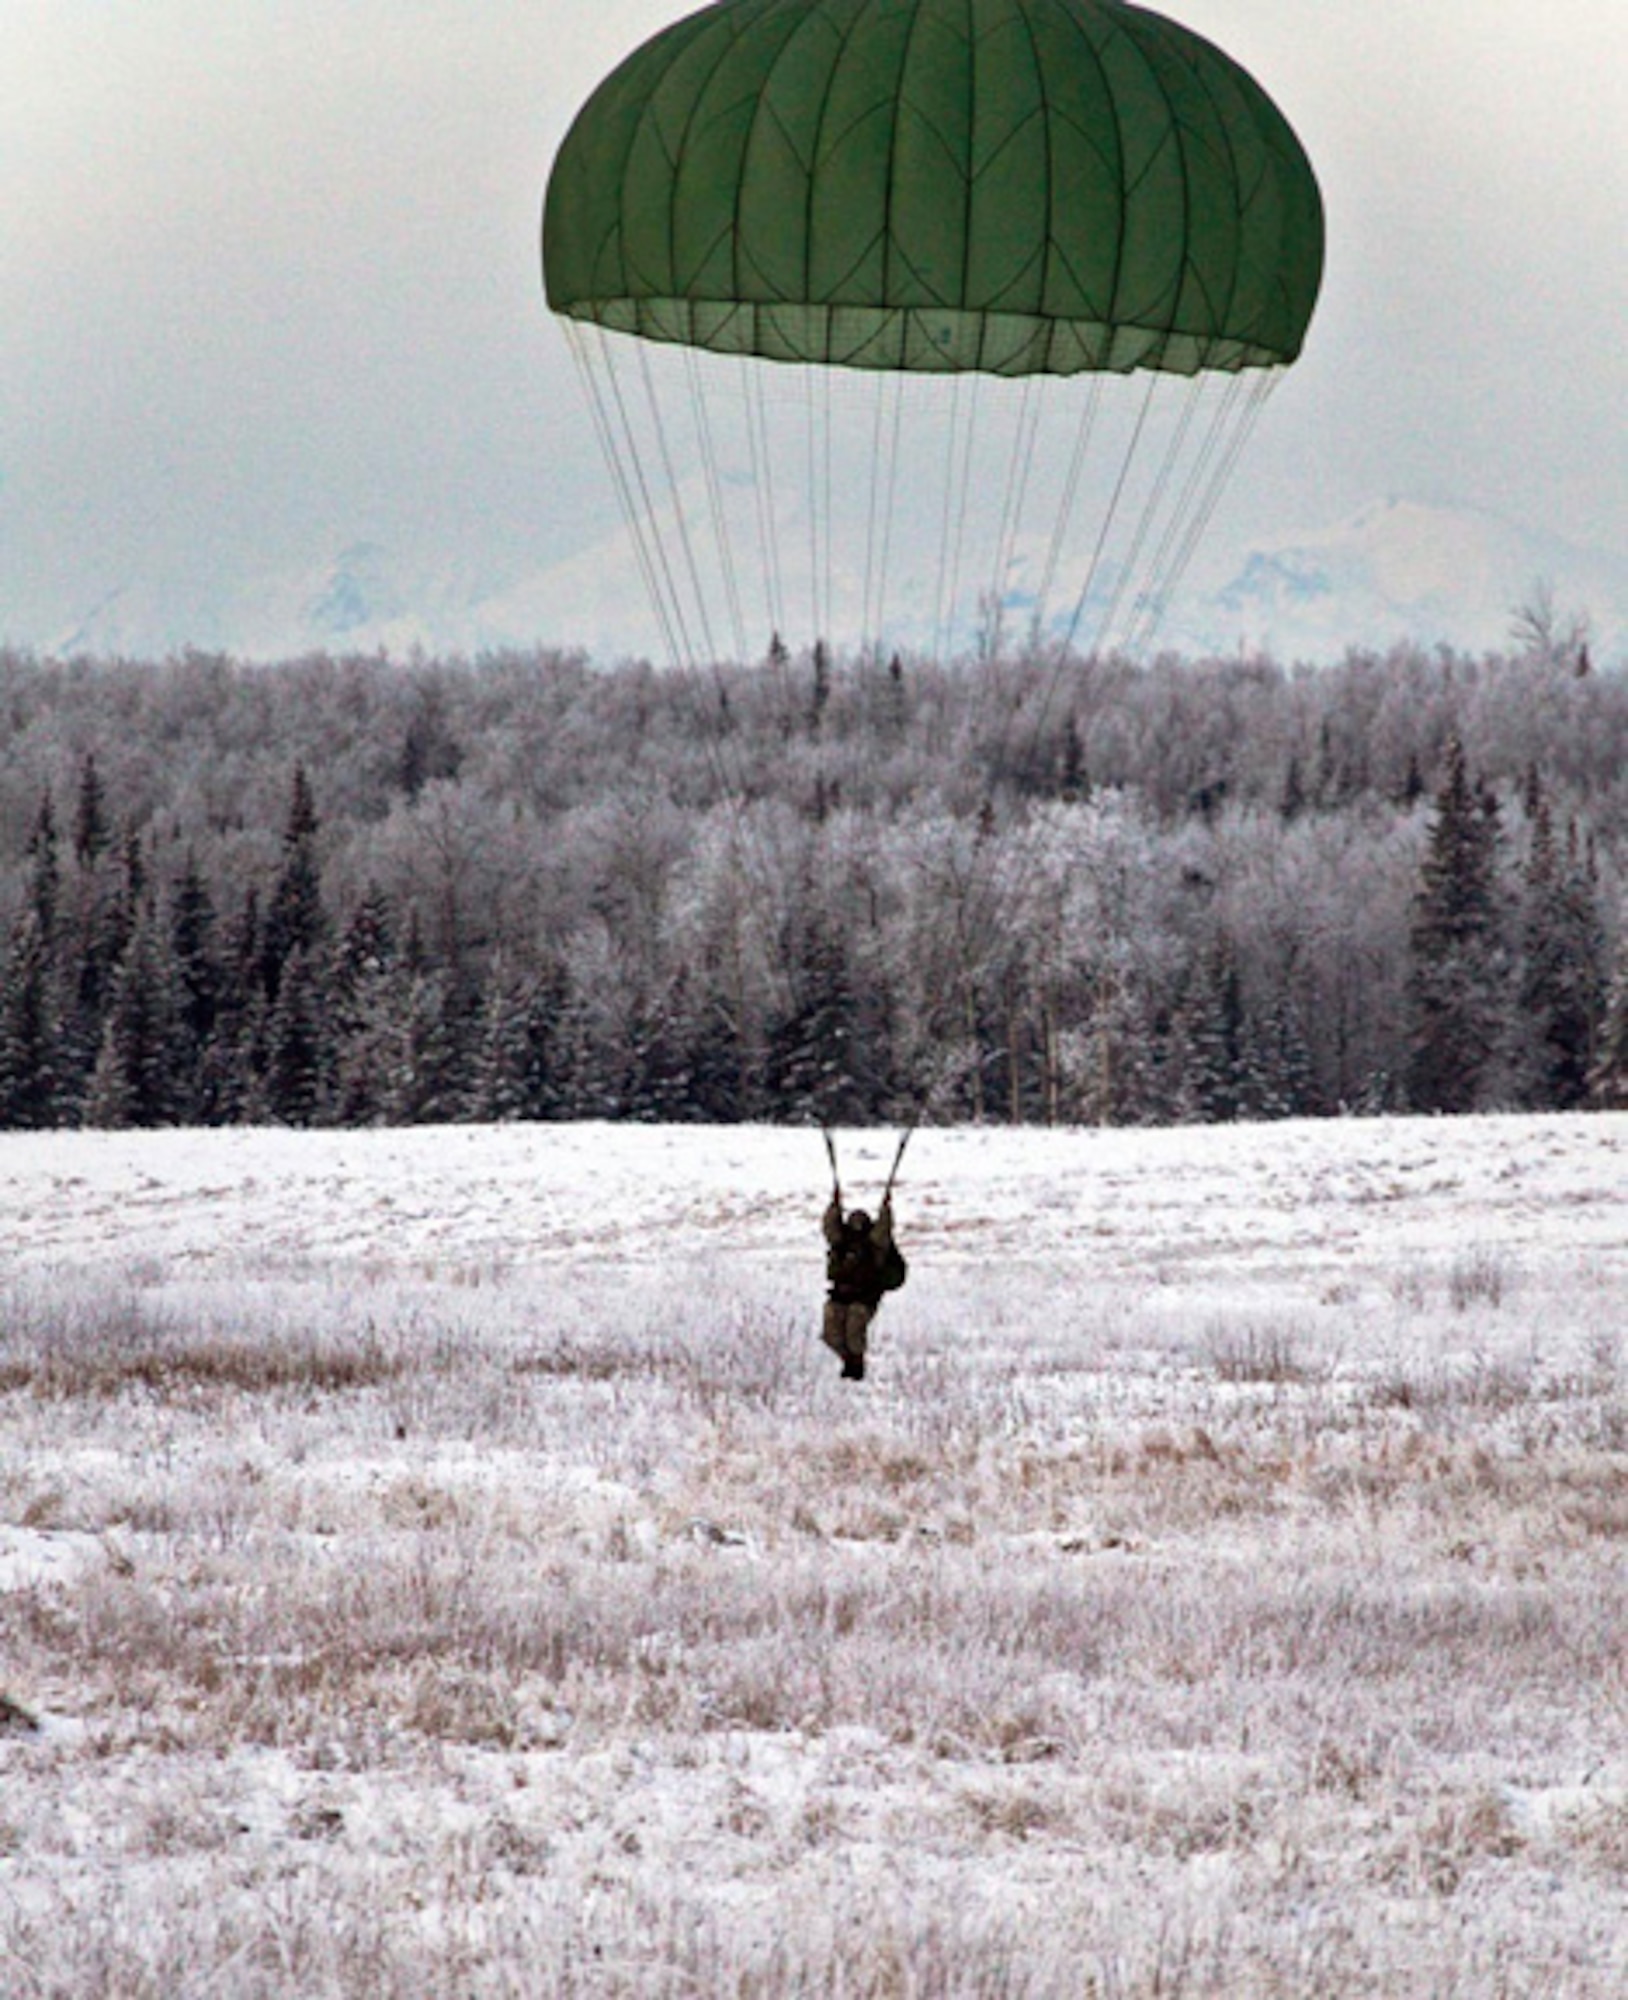 An Indian army soldier lands at Malamute drop zone on Joint Base Elmendorf-Richardson after an airborne jump, Nov. 10, during the combined training exercise Yudh Abhyas 2010. (U.S. Army photo/Spc. Ashley Armstrong)